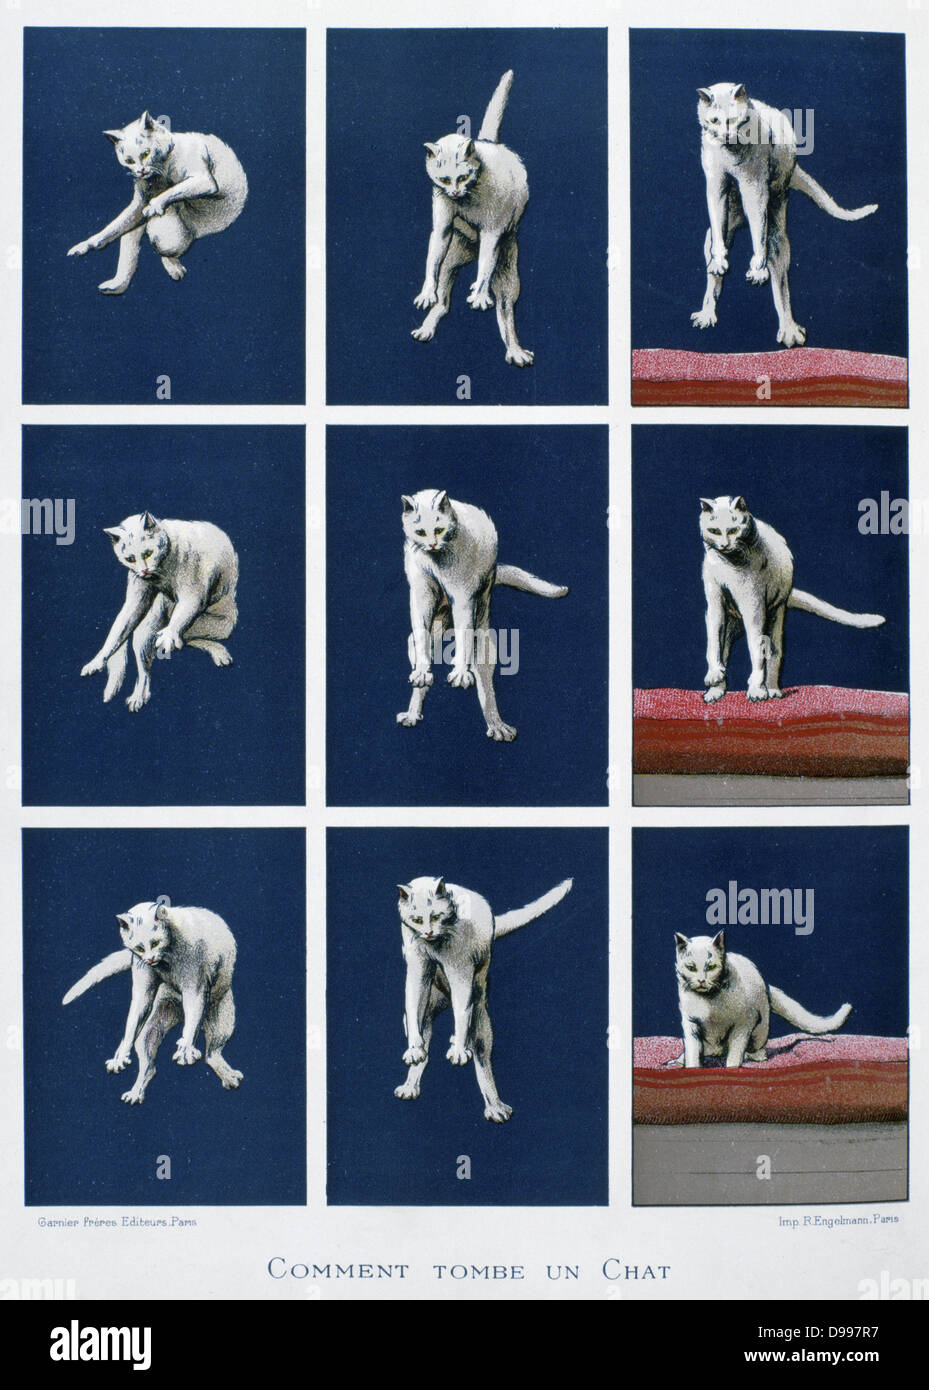 Series of frames of a cat falling. Cinematography enabled Muybridge and Marey  to study the locomotion of animals.  From  'Les dernieres merveilles de la science' (The Latest Marvels of Science), Paris, c1895. Physiology Stock Photo